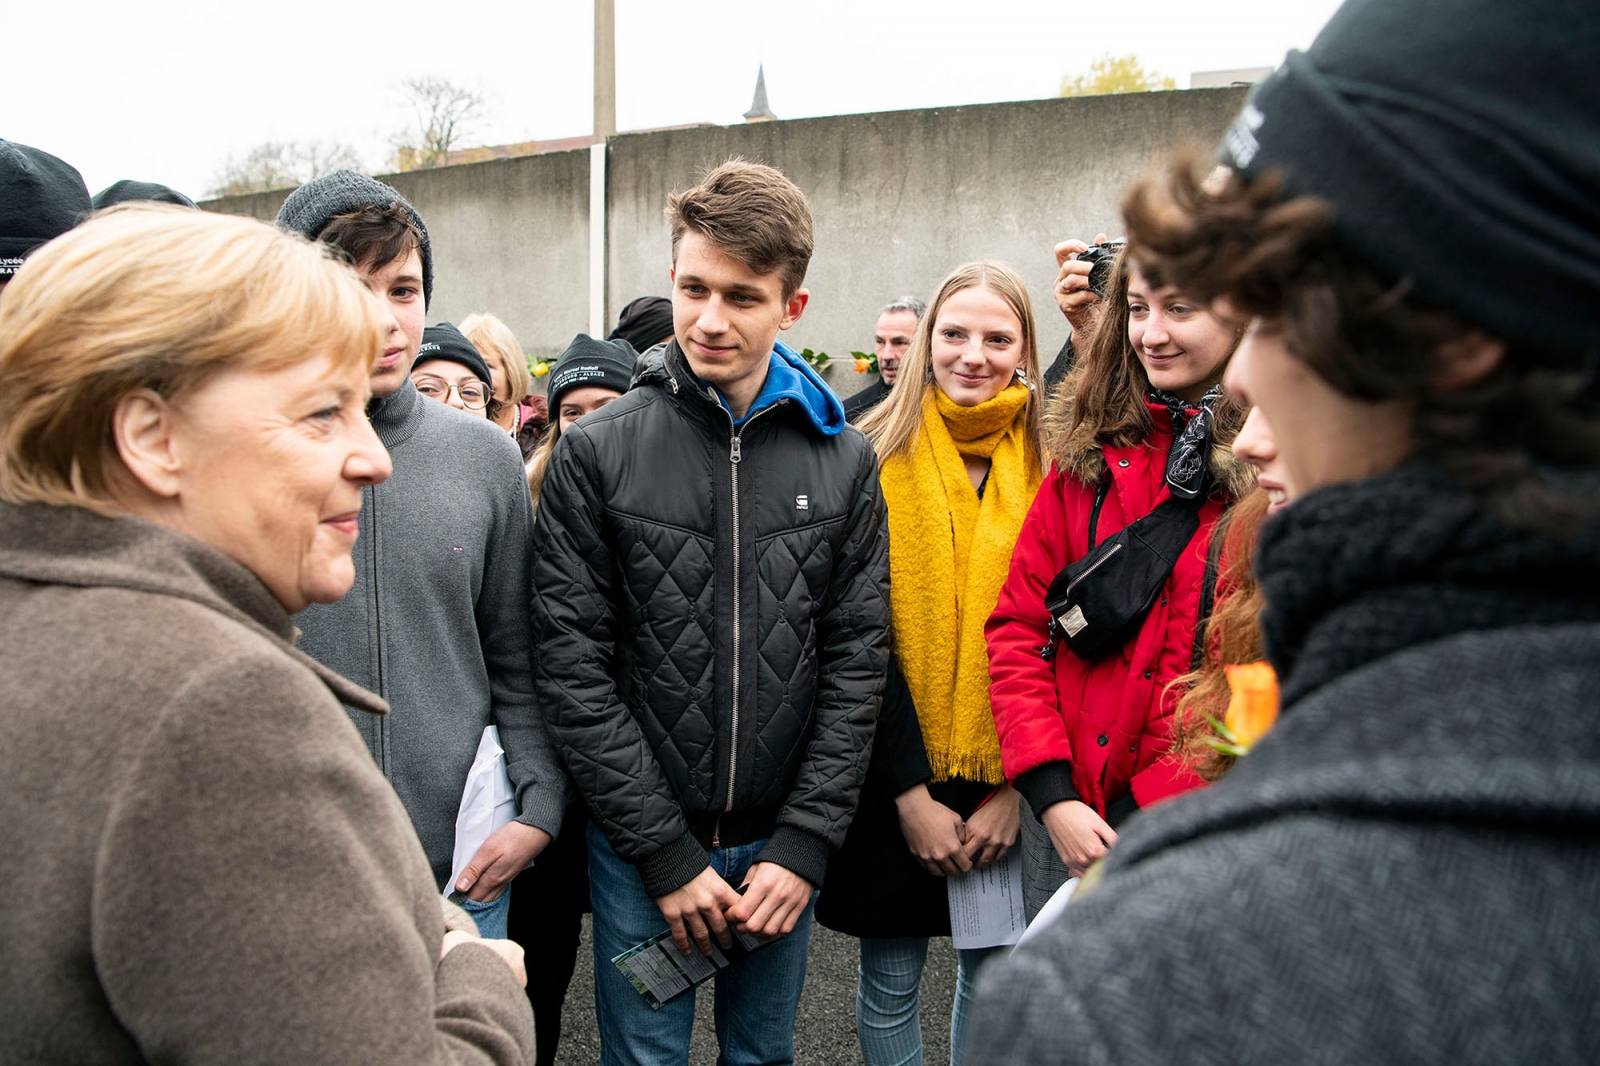 Federal Chancellor Angela Merkel in conversation with young people